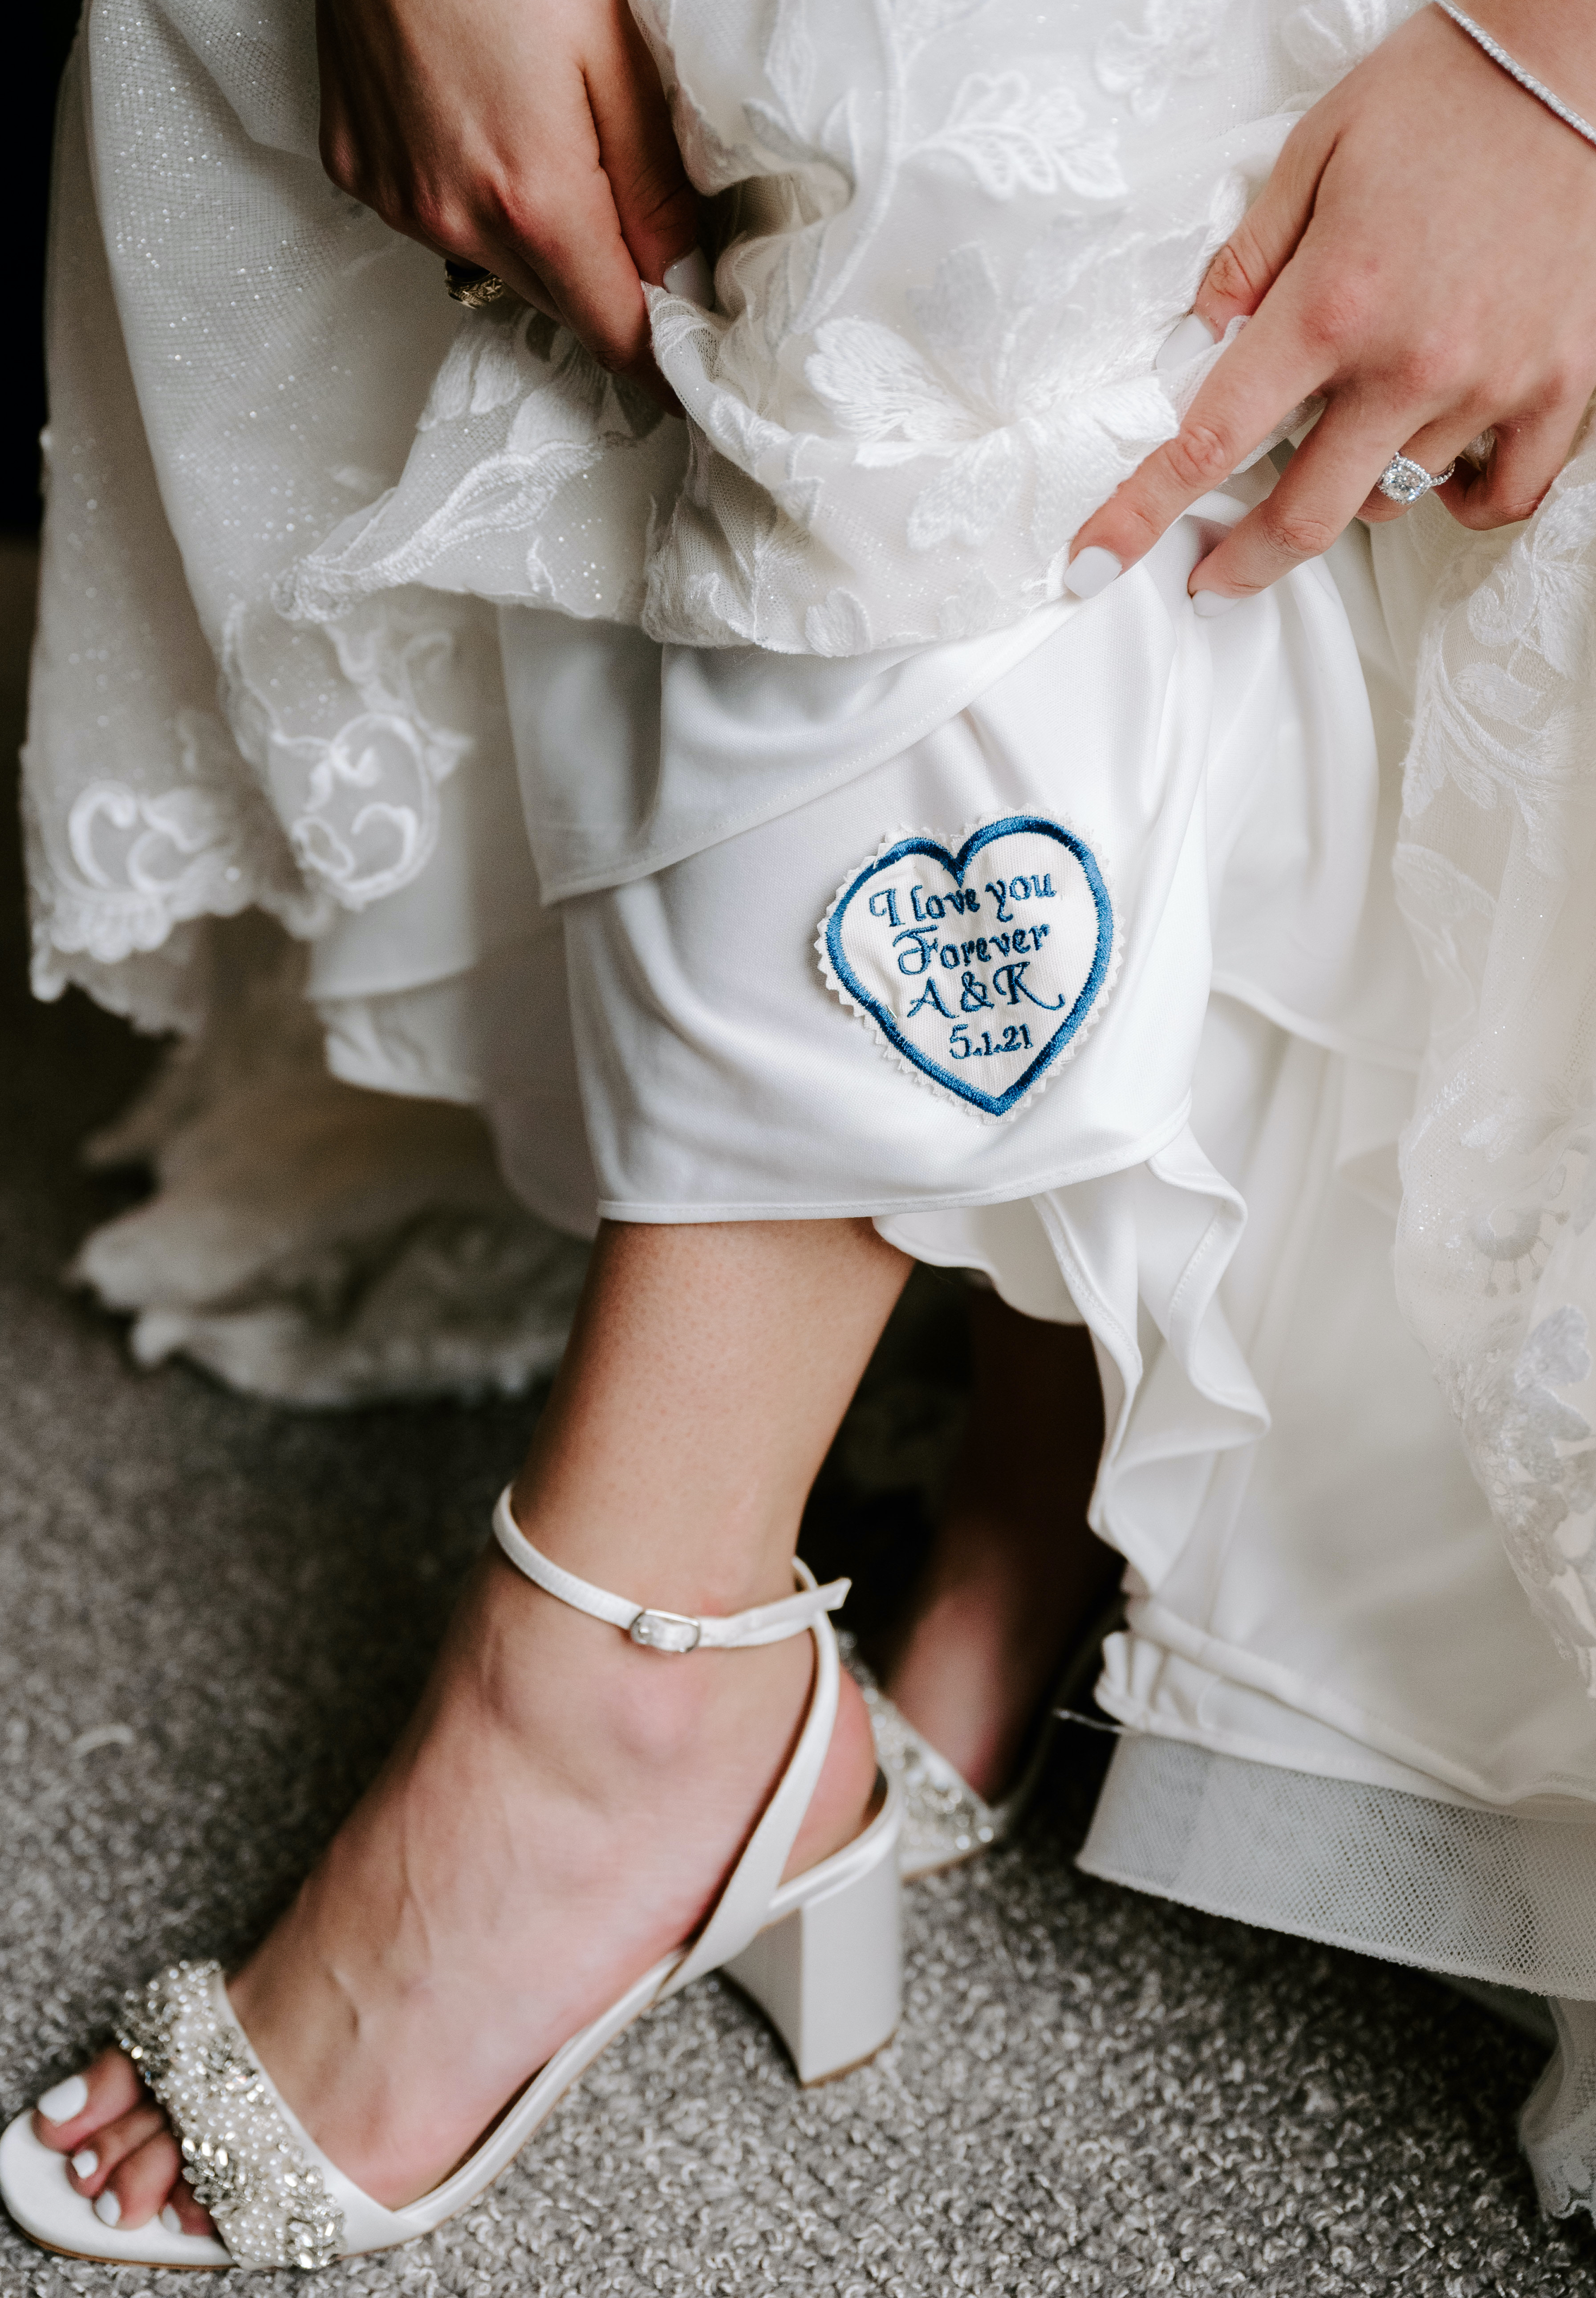 The bride has an blue embroidered heart on her wedding gown that says "I love you forever, A&K"